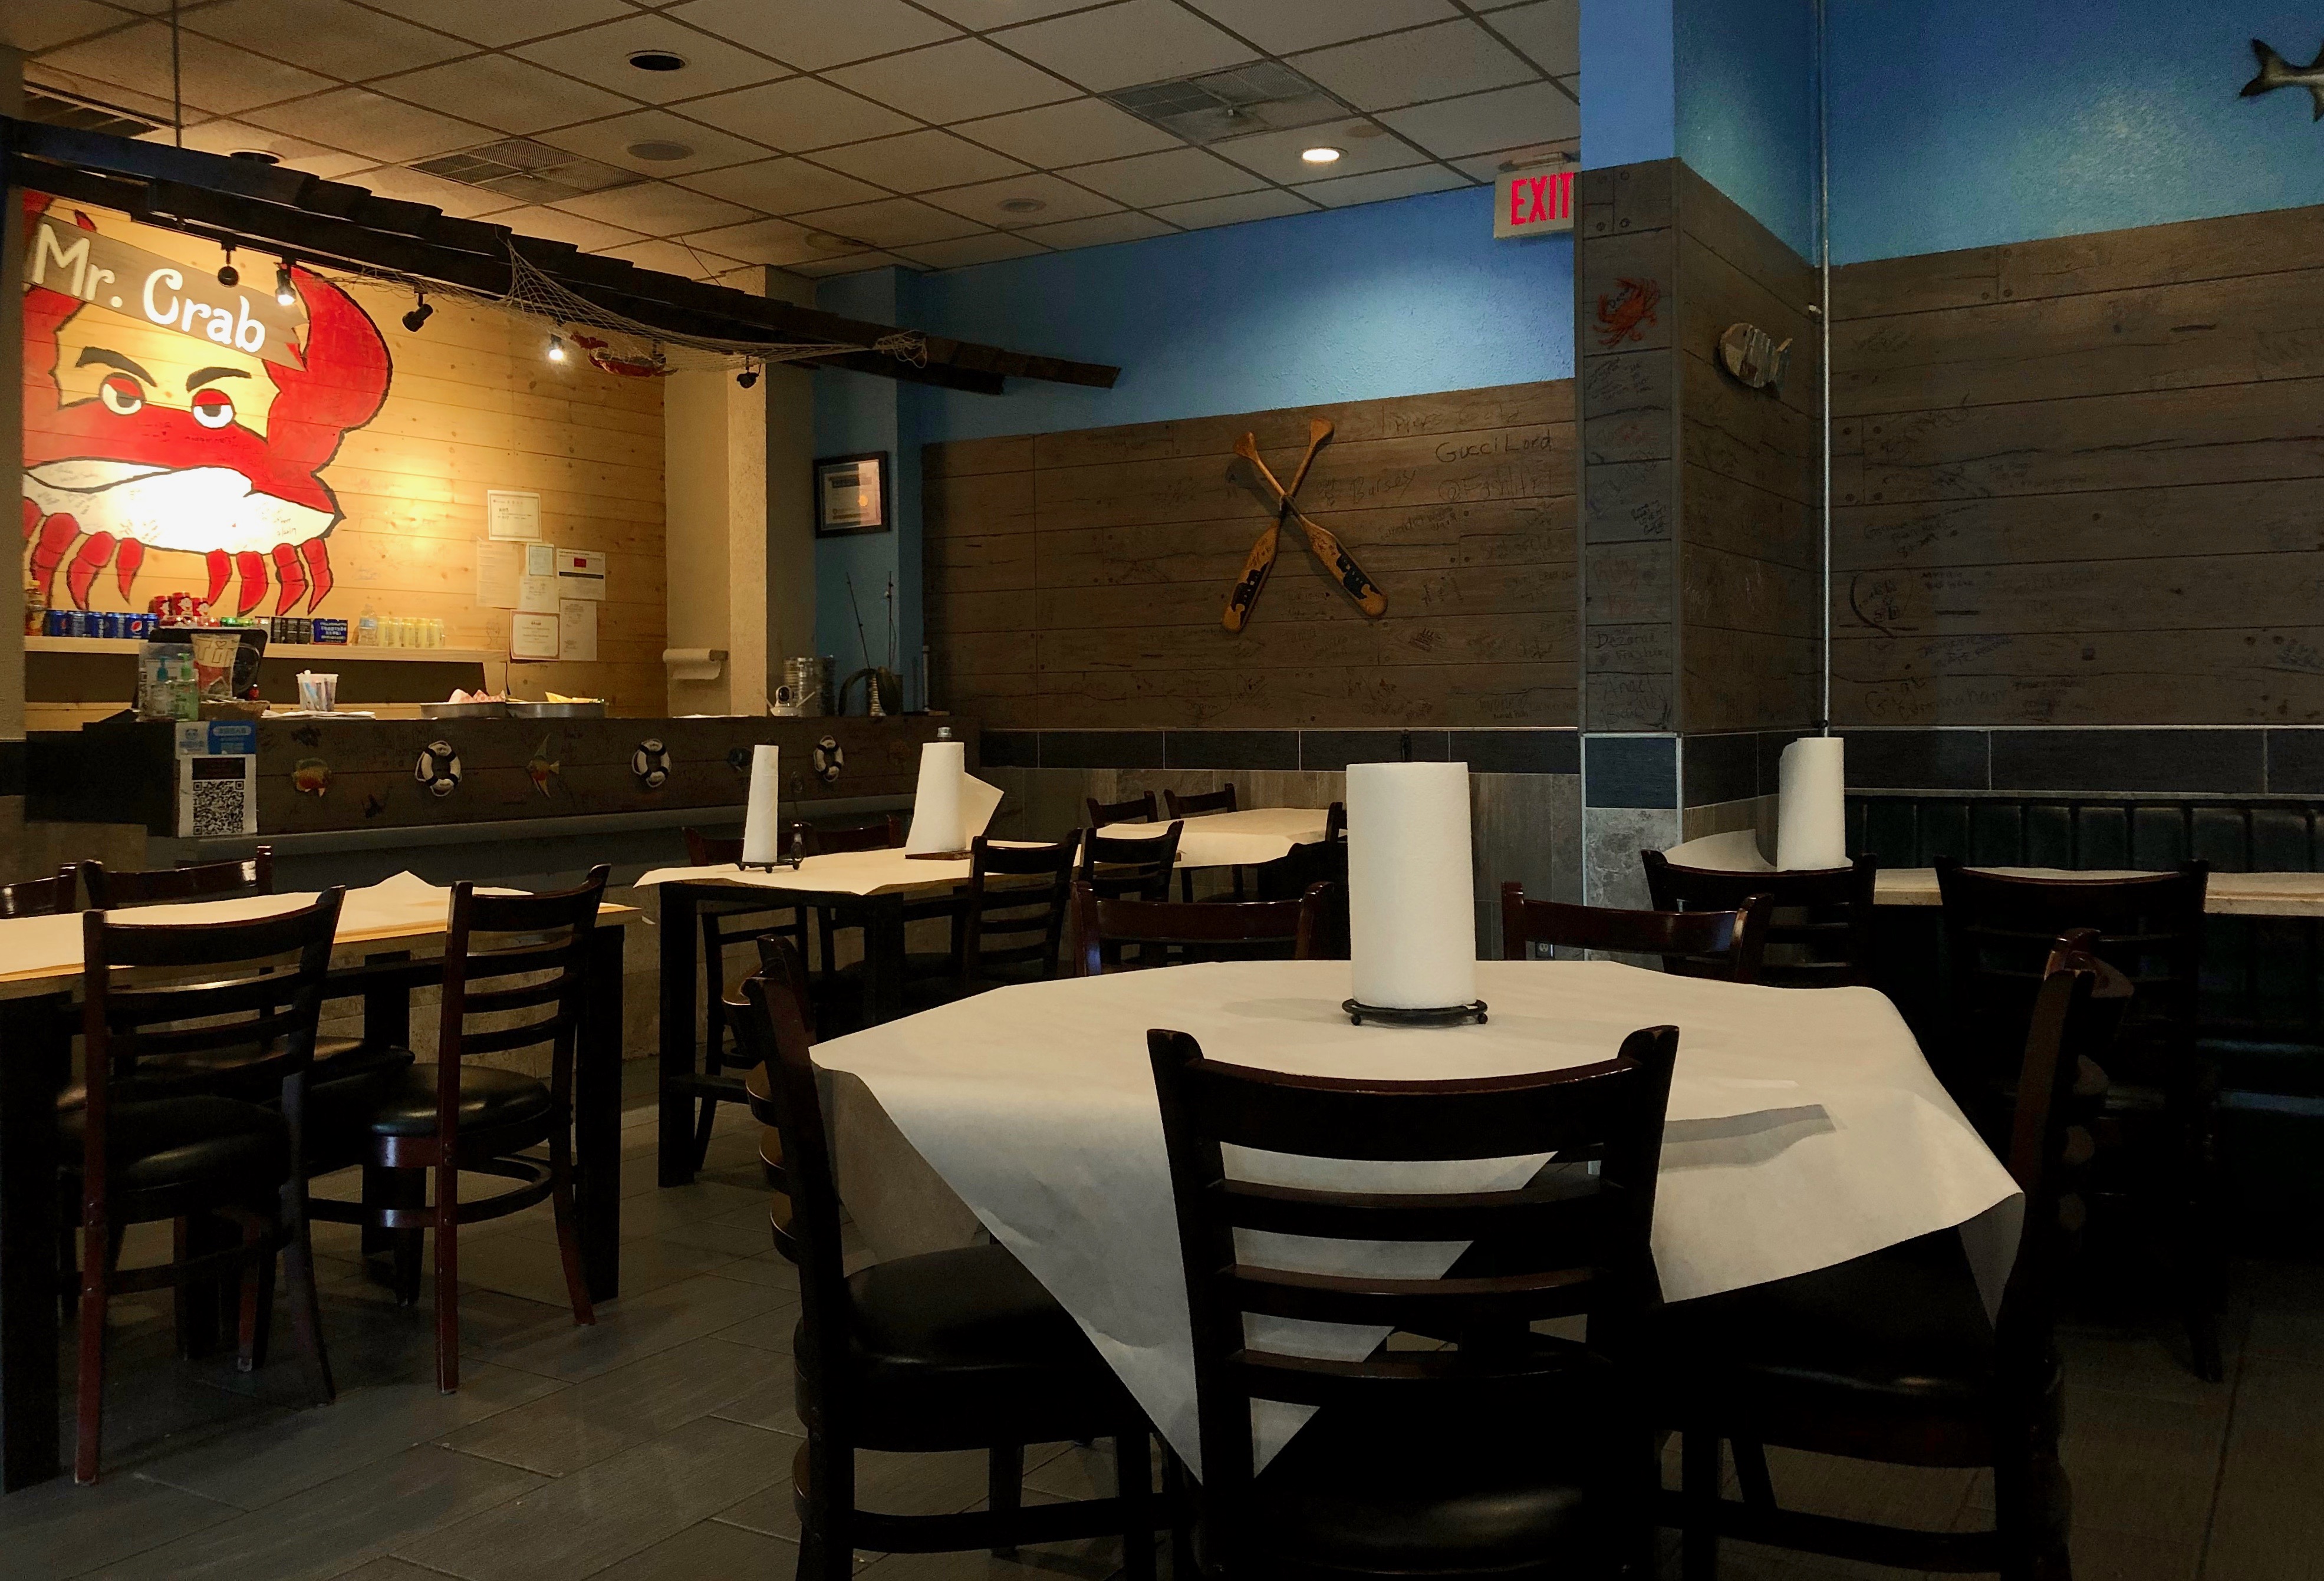 Image: The inside of Mr. Crab restauarant's dining room. Tables are lined with white paper. Paper towel rolls are on each of the tables. The top half of the walls are covered in shiplap. On the left side there is a mural of a crab with 